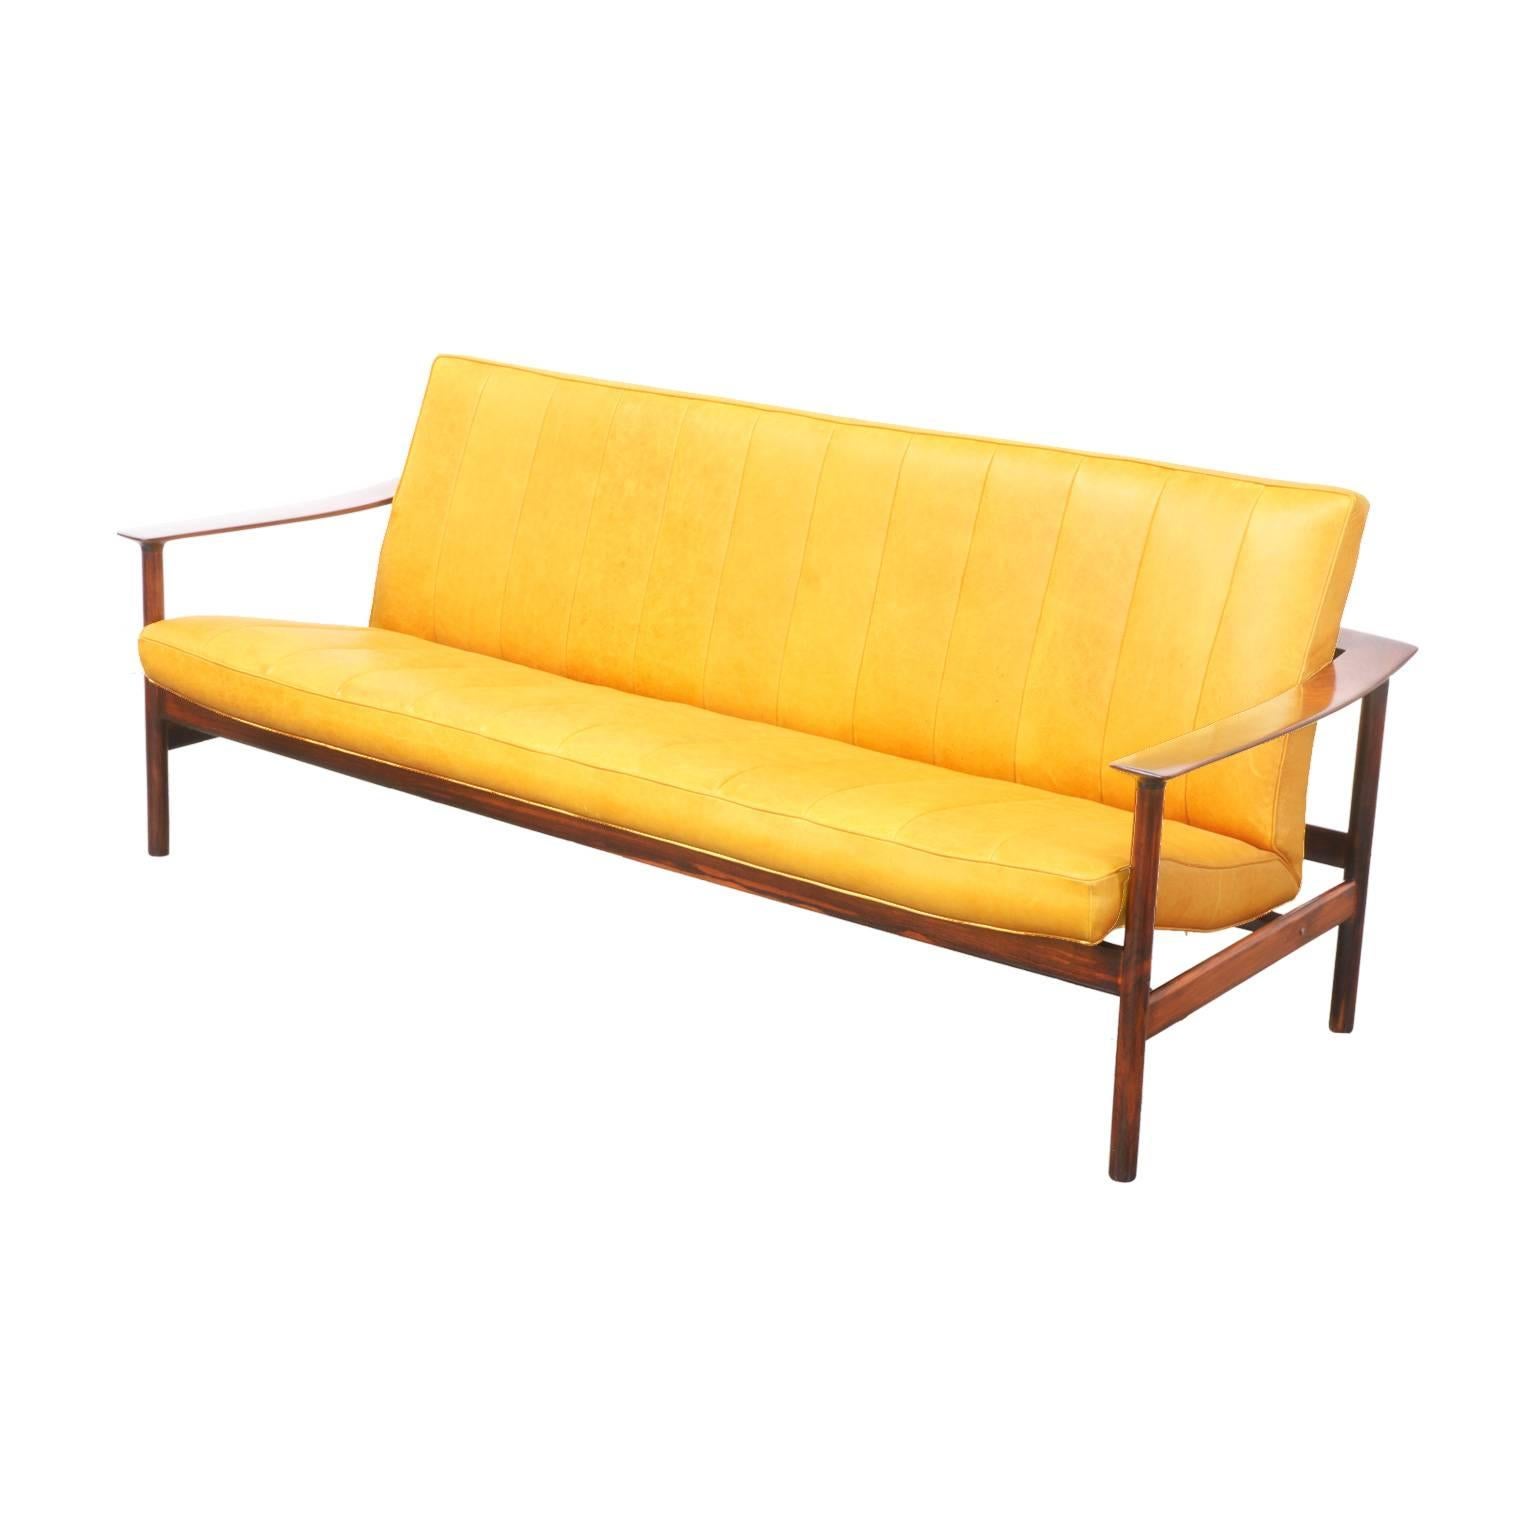 Designer: Sven Ivar Dysthe.
Manufacturer: Dokka Mobler.
Period/Style: Scandinavian Modern.
Country: Norway.
Date: 1960s.

Dimensions: 30.75″ H x 73.5″ W x 29″ D.
Seat height 15″.
Materials: Rosewood, leather.
Condition: Excellent – Newly